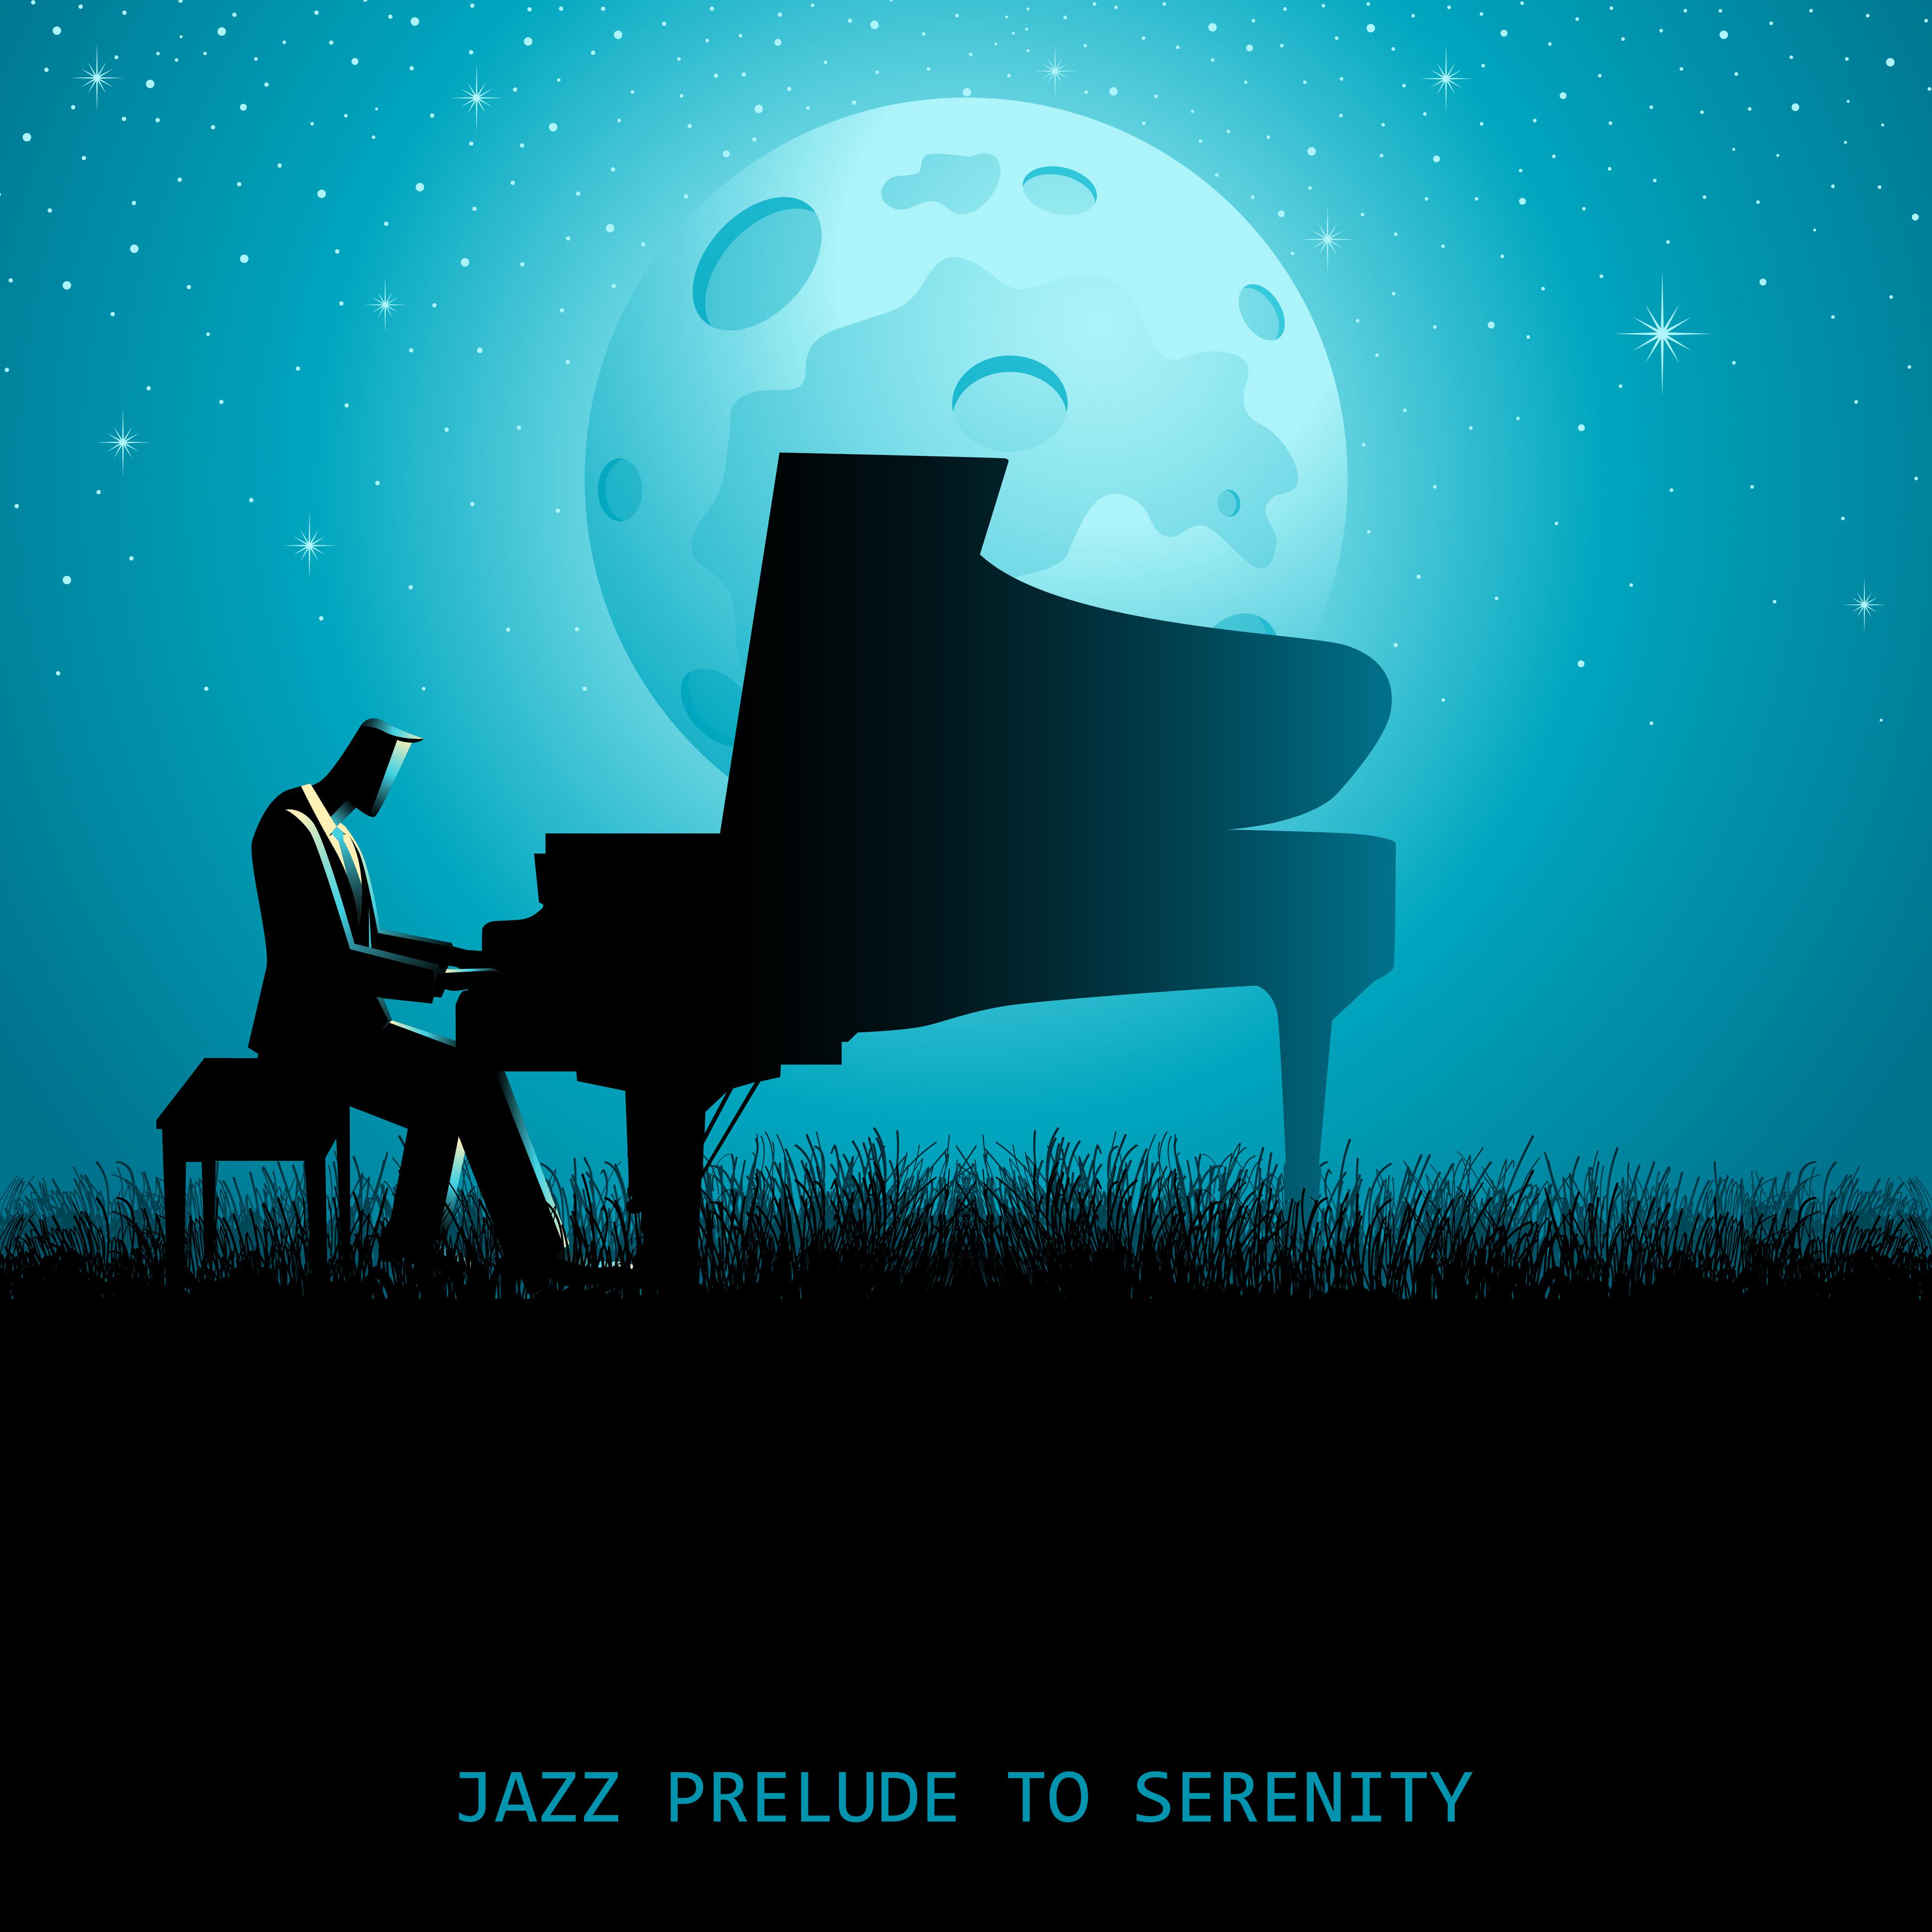 Jazz Prelude to Serenity: 15 Gentle & Sensual Instrumental Jazz 2019 Songs, Total Relaxation Music, Soothing Sounds of Piano, Guitar & Other